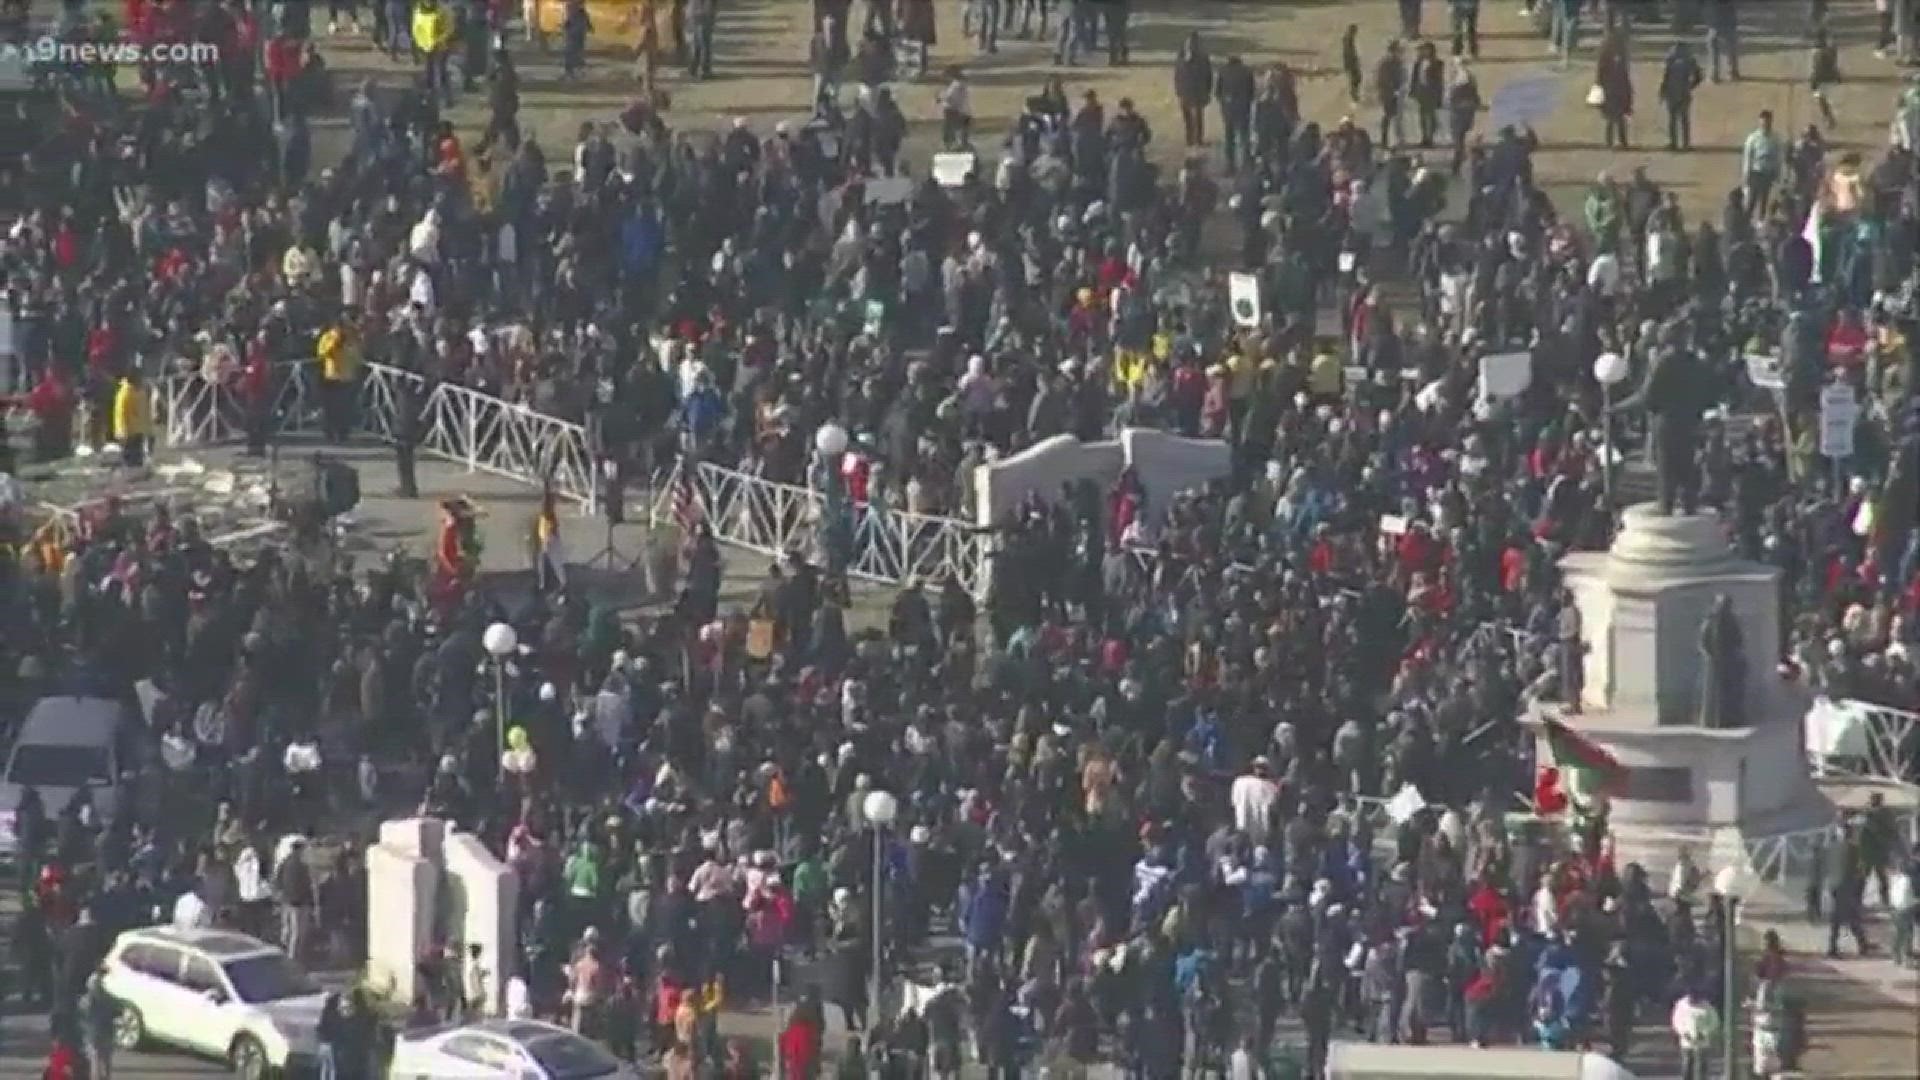 The 35th Annual Dr. Martin Luther King Jr. Day Marade traveled from Denver's City Park to Civic Center Park on Monday.